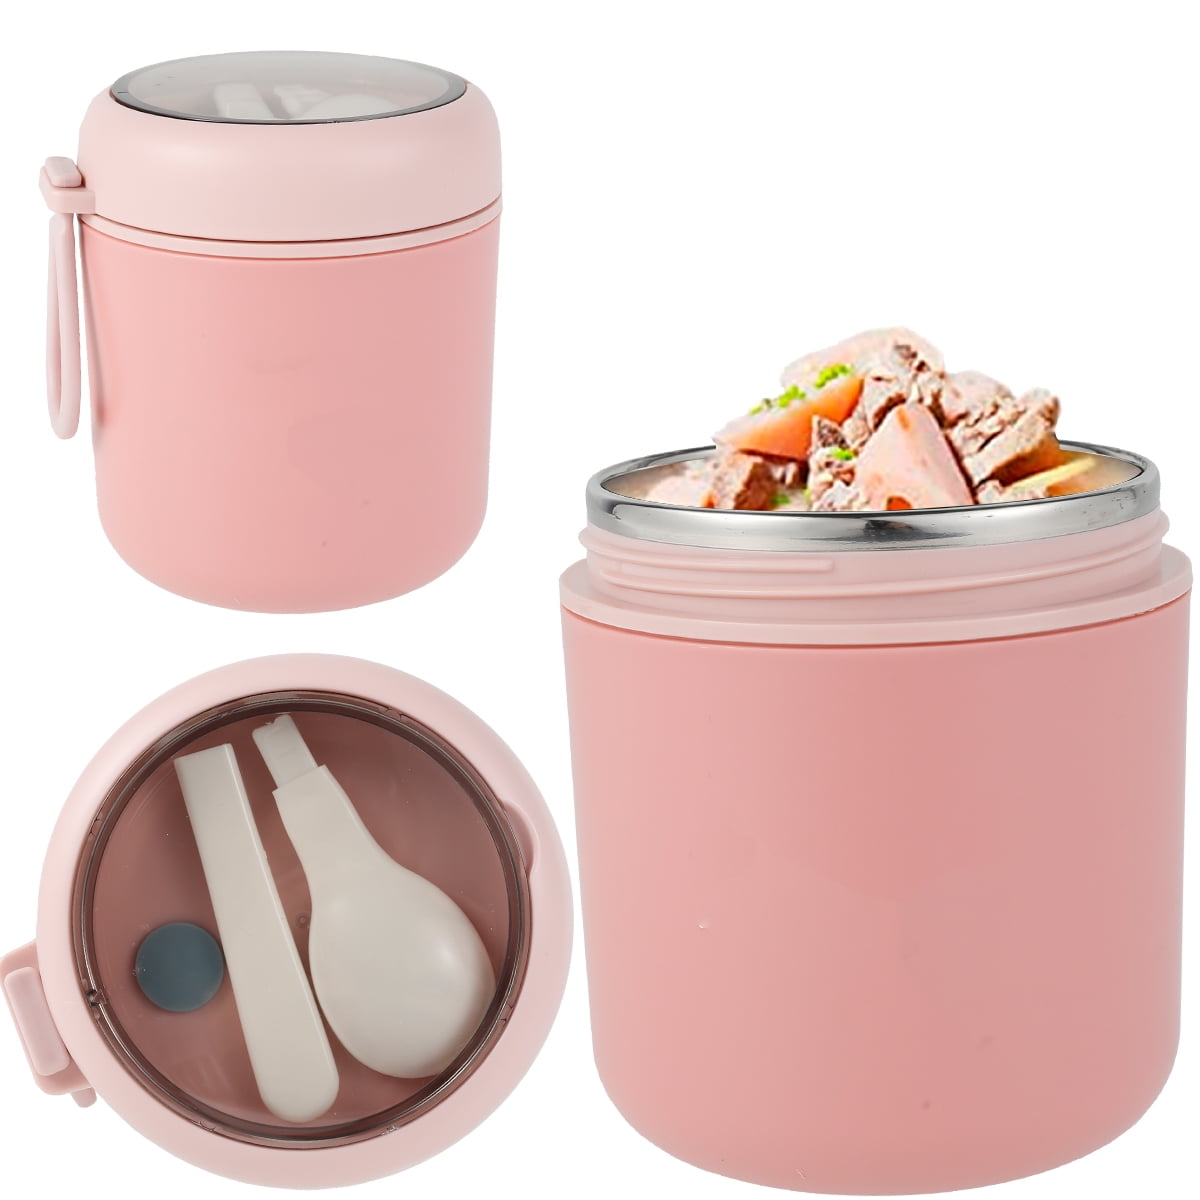 Qenwkxz 18 oz Insulated Food Jar Vacuum Bento Box Lunch Containers